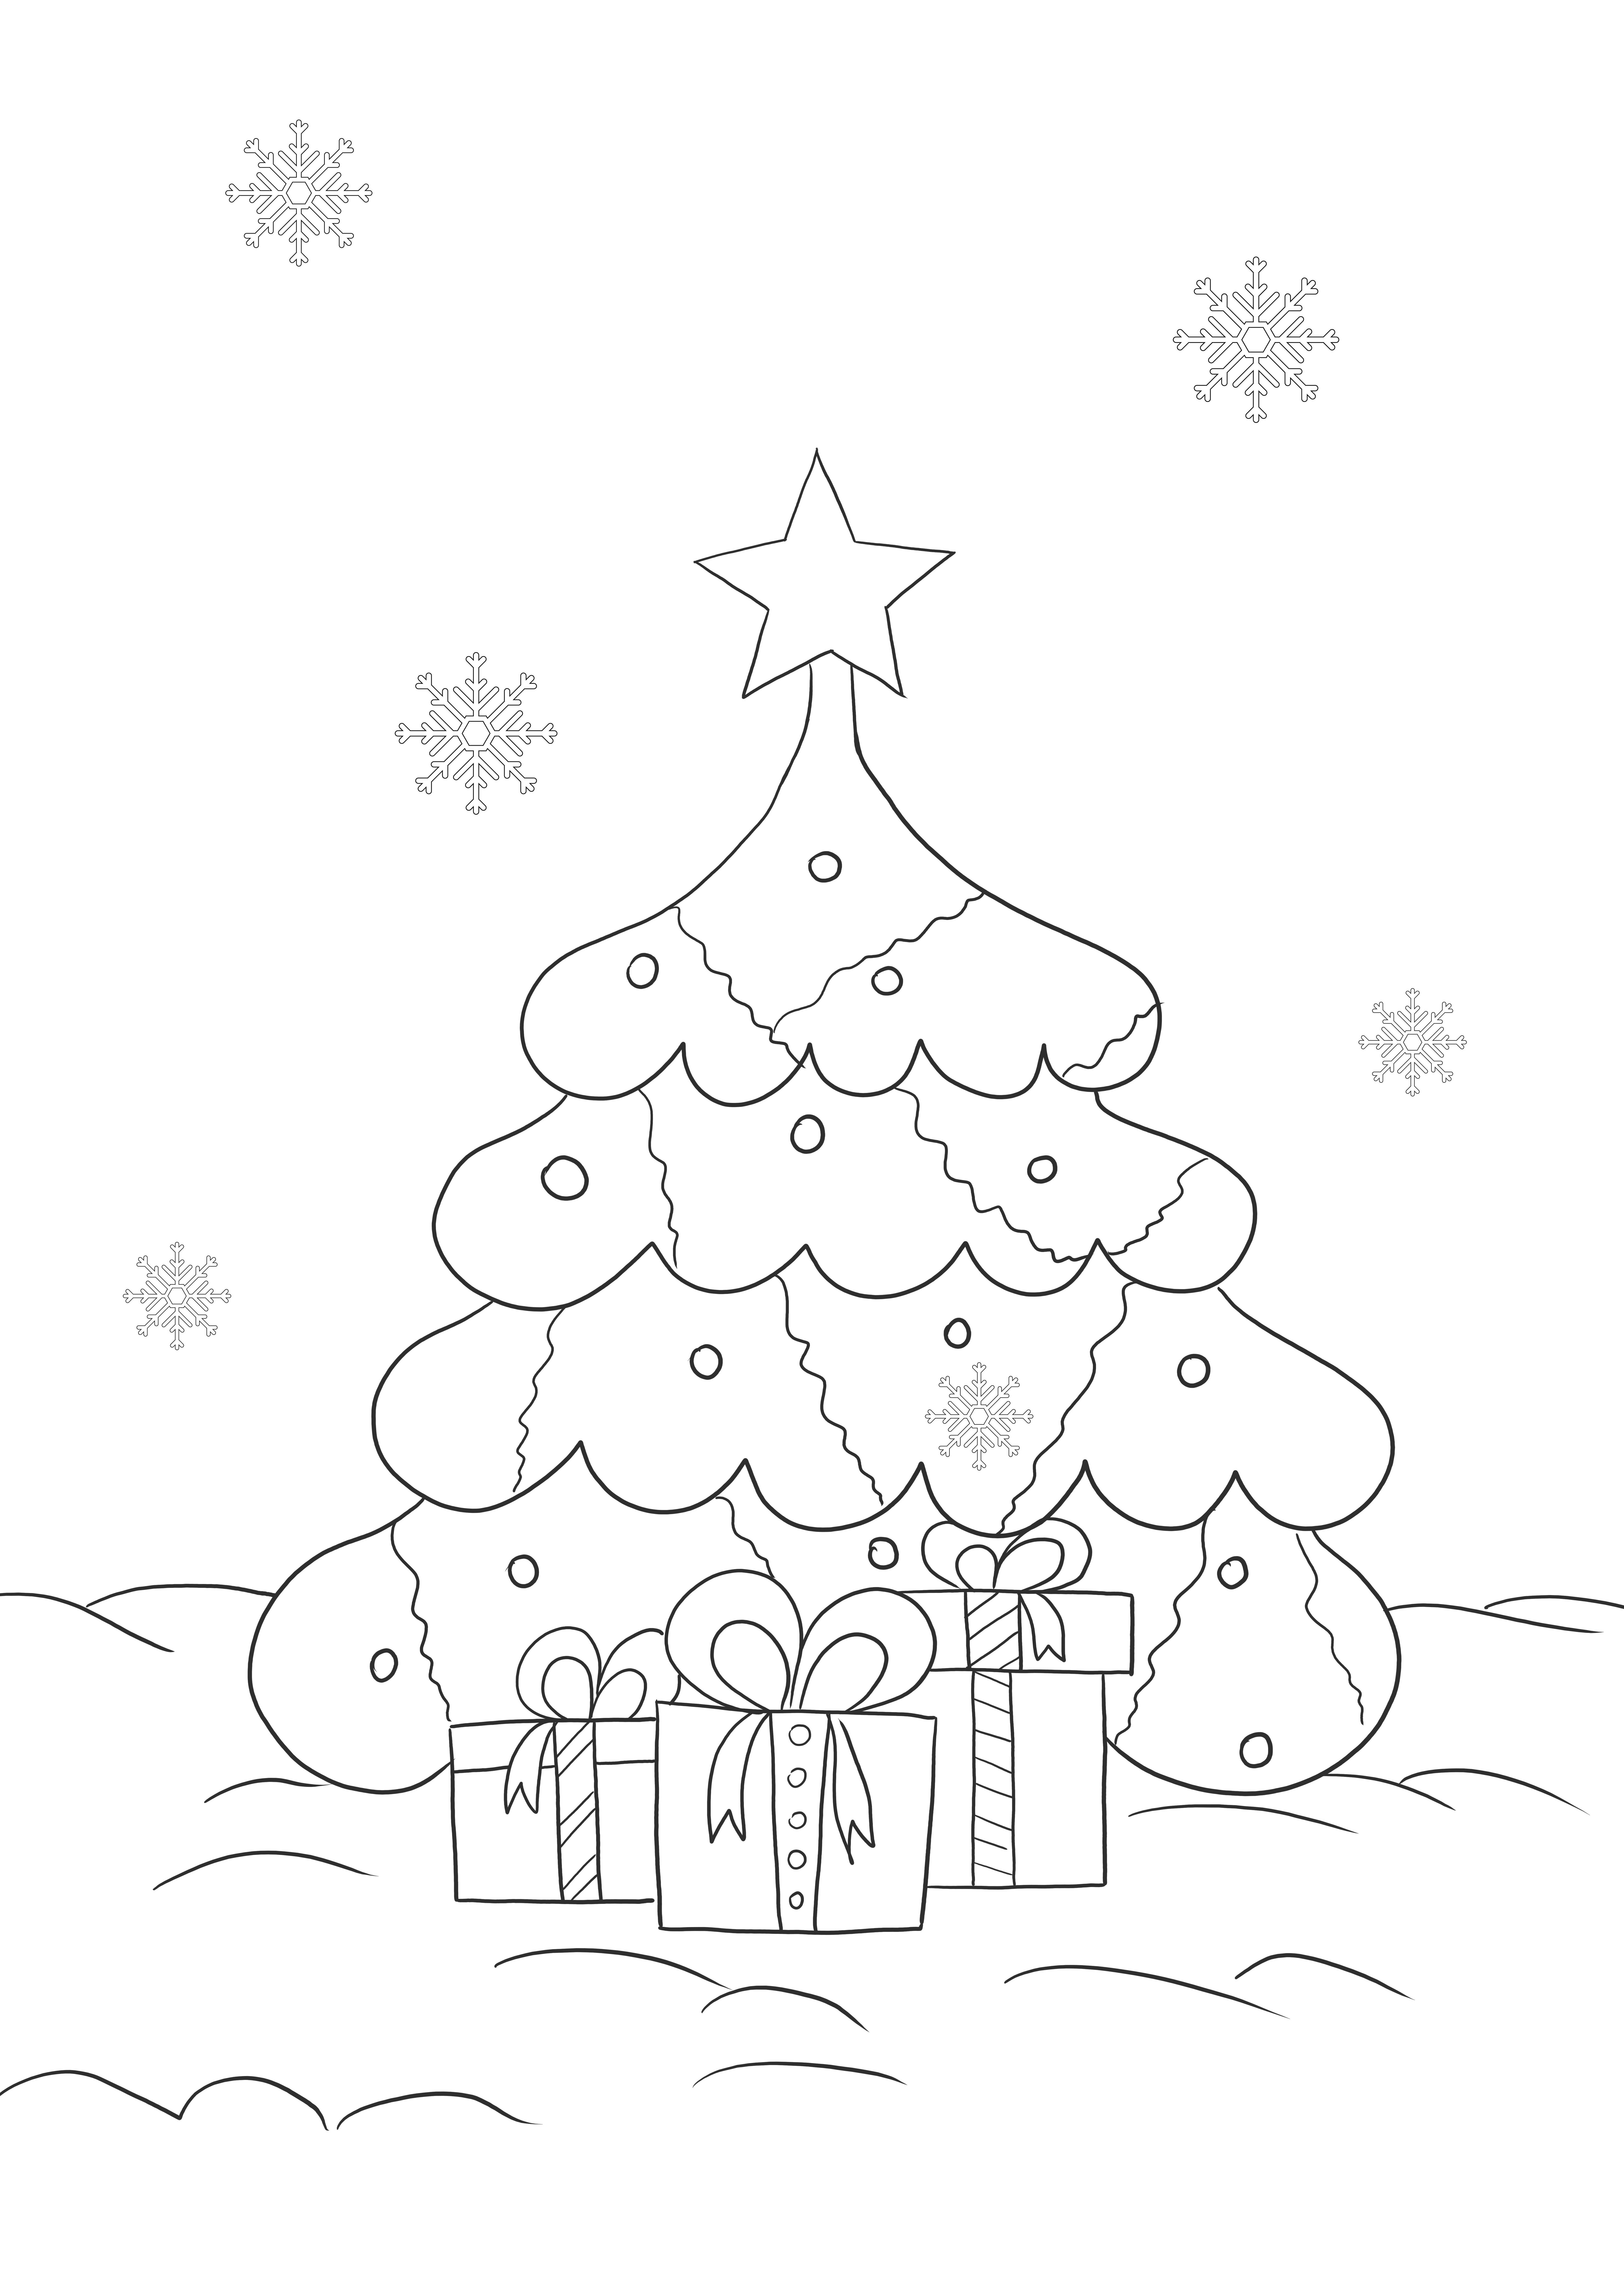 A free printable of a Christmas Tree and presents under it to color